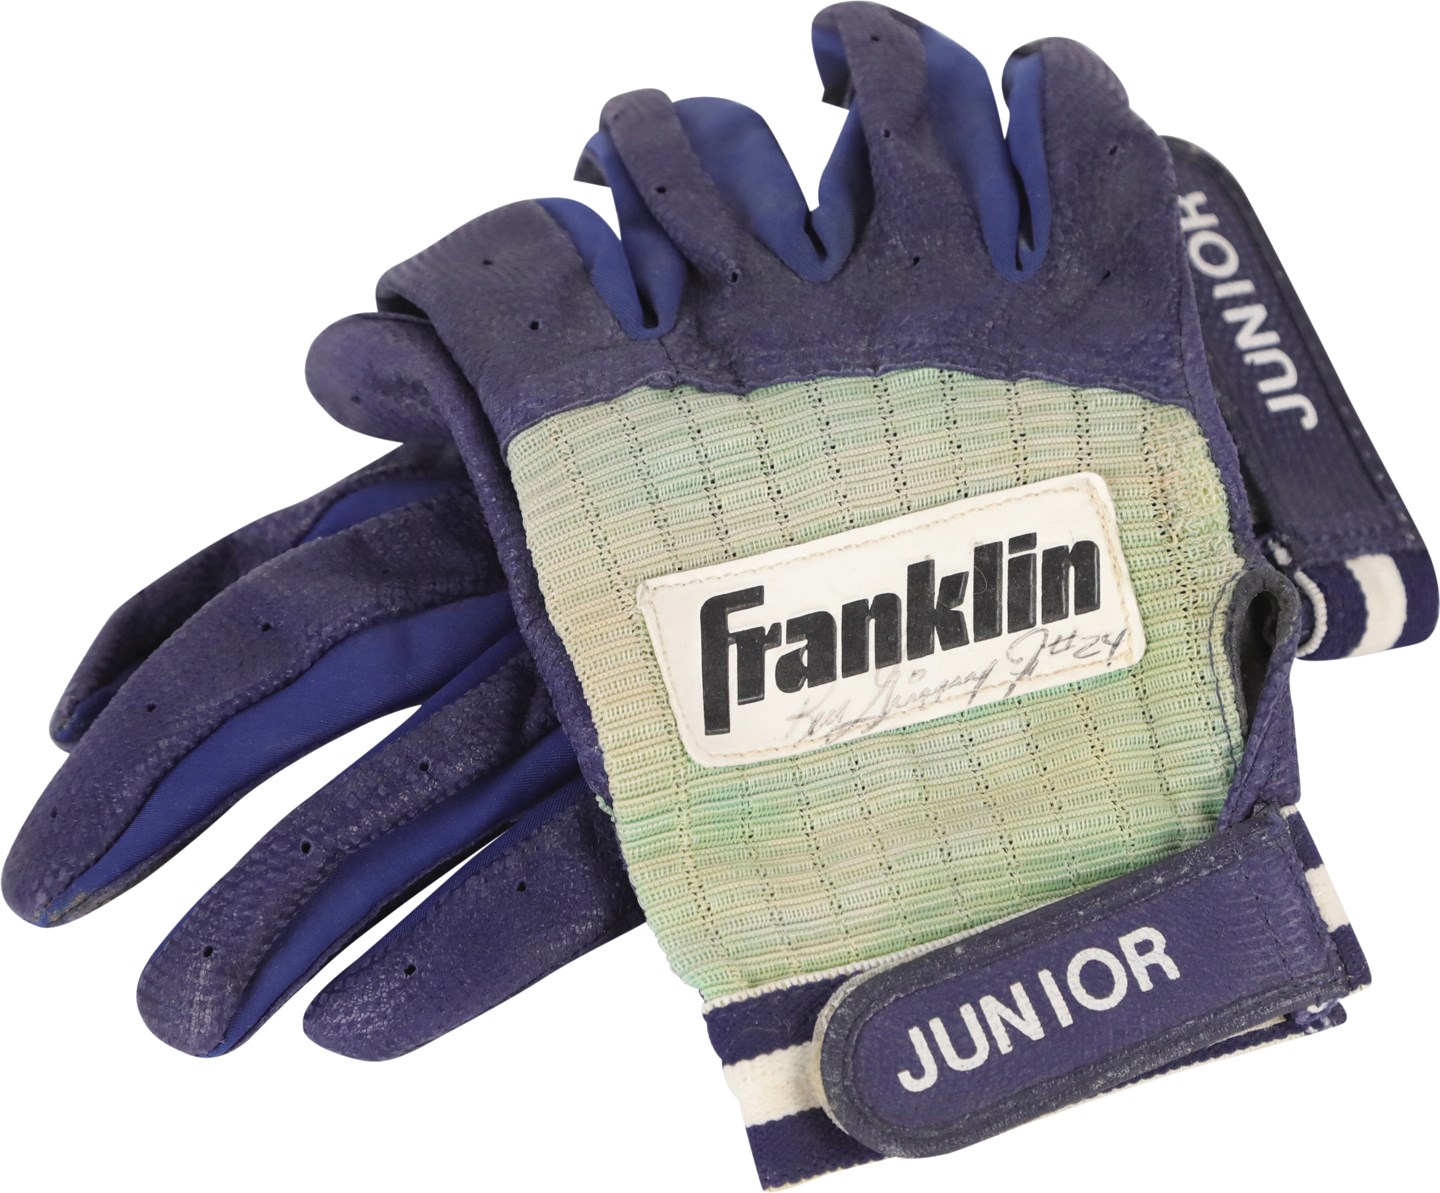 Baseball Autographs - Late 1990s Ken Griffey Jr. Seattle Mariners Signed Game Used Batting Gloves